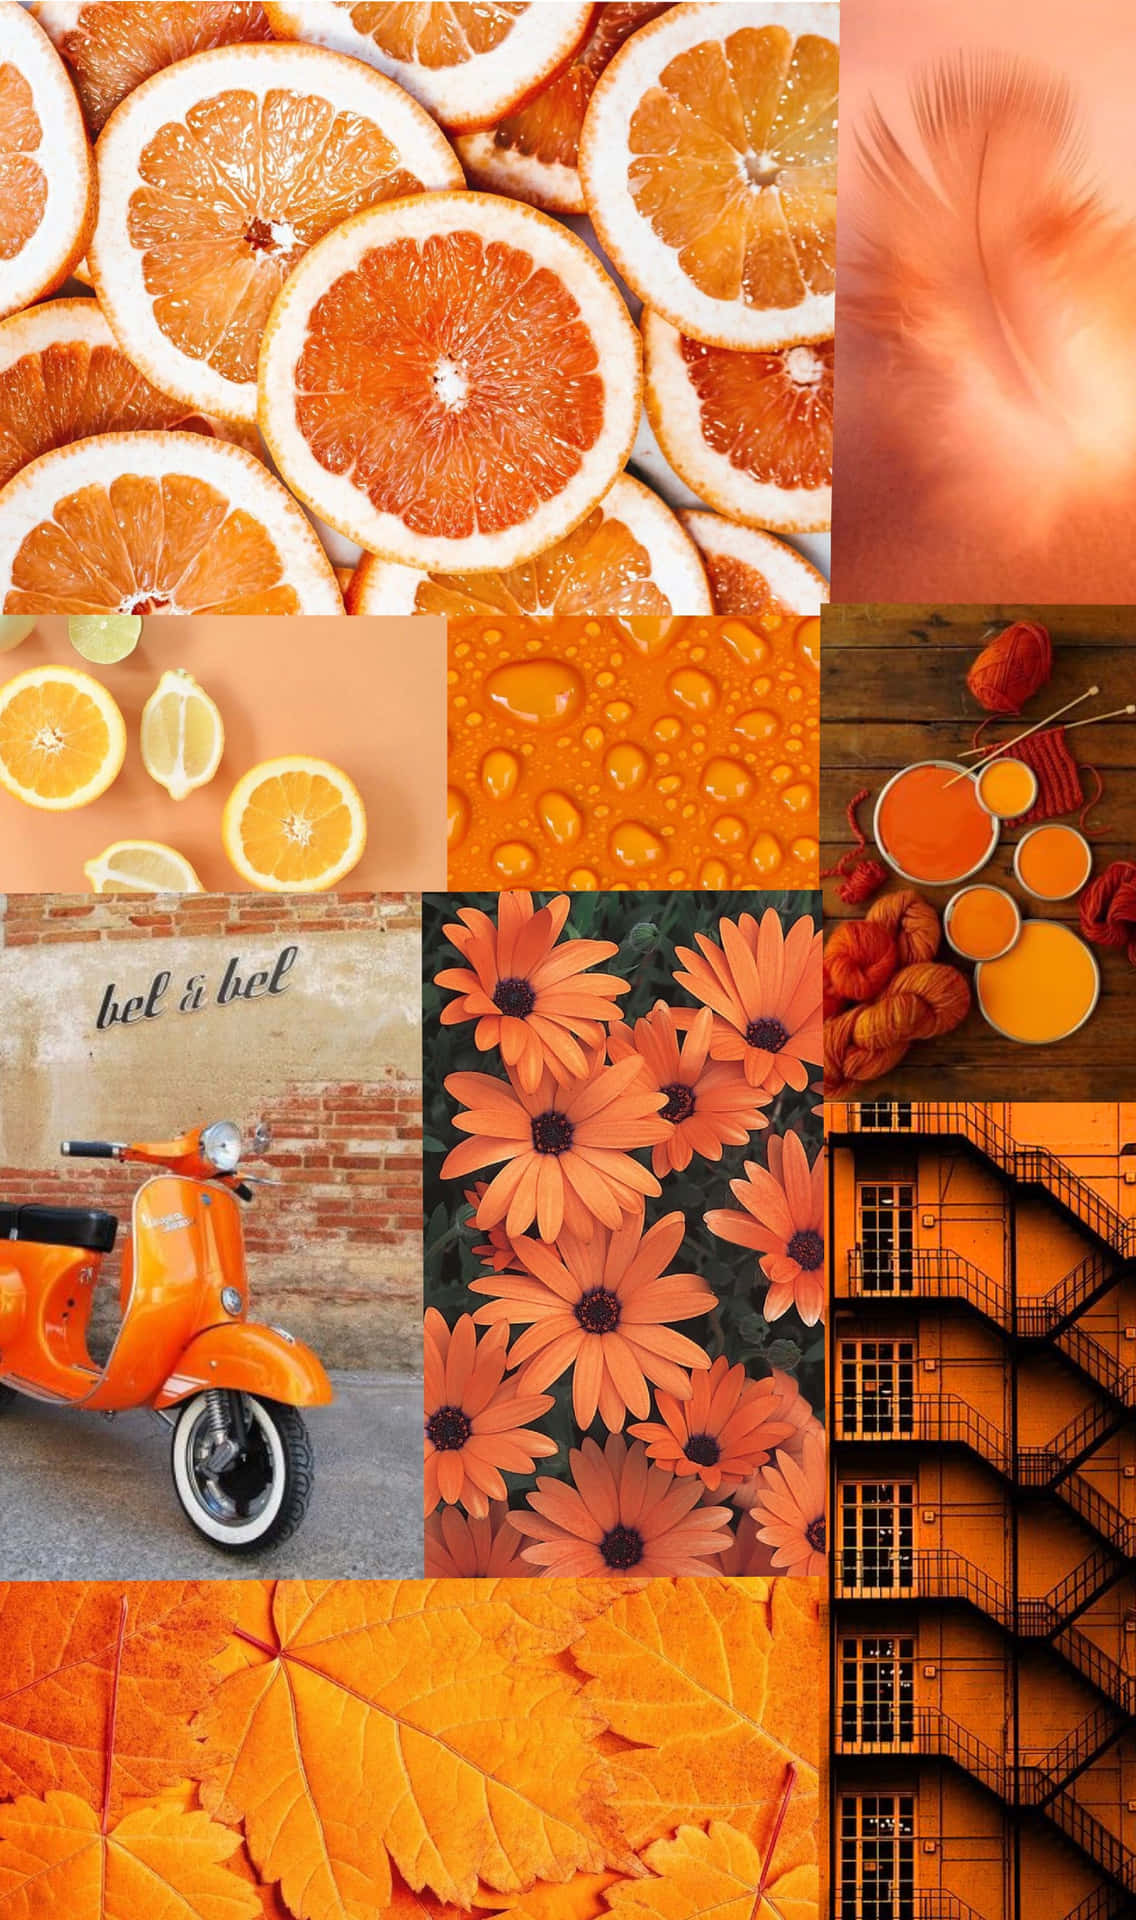 Brighten up the day with an Orange Aesthetic